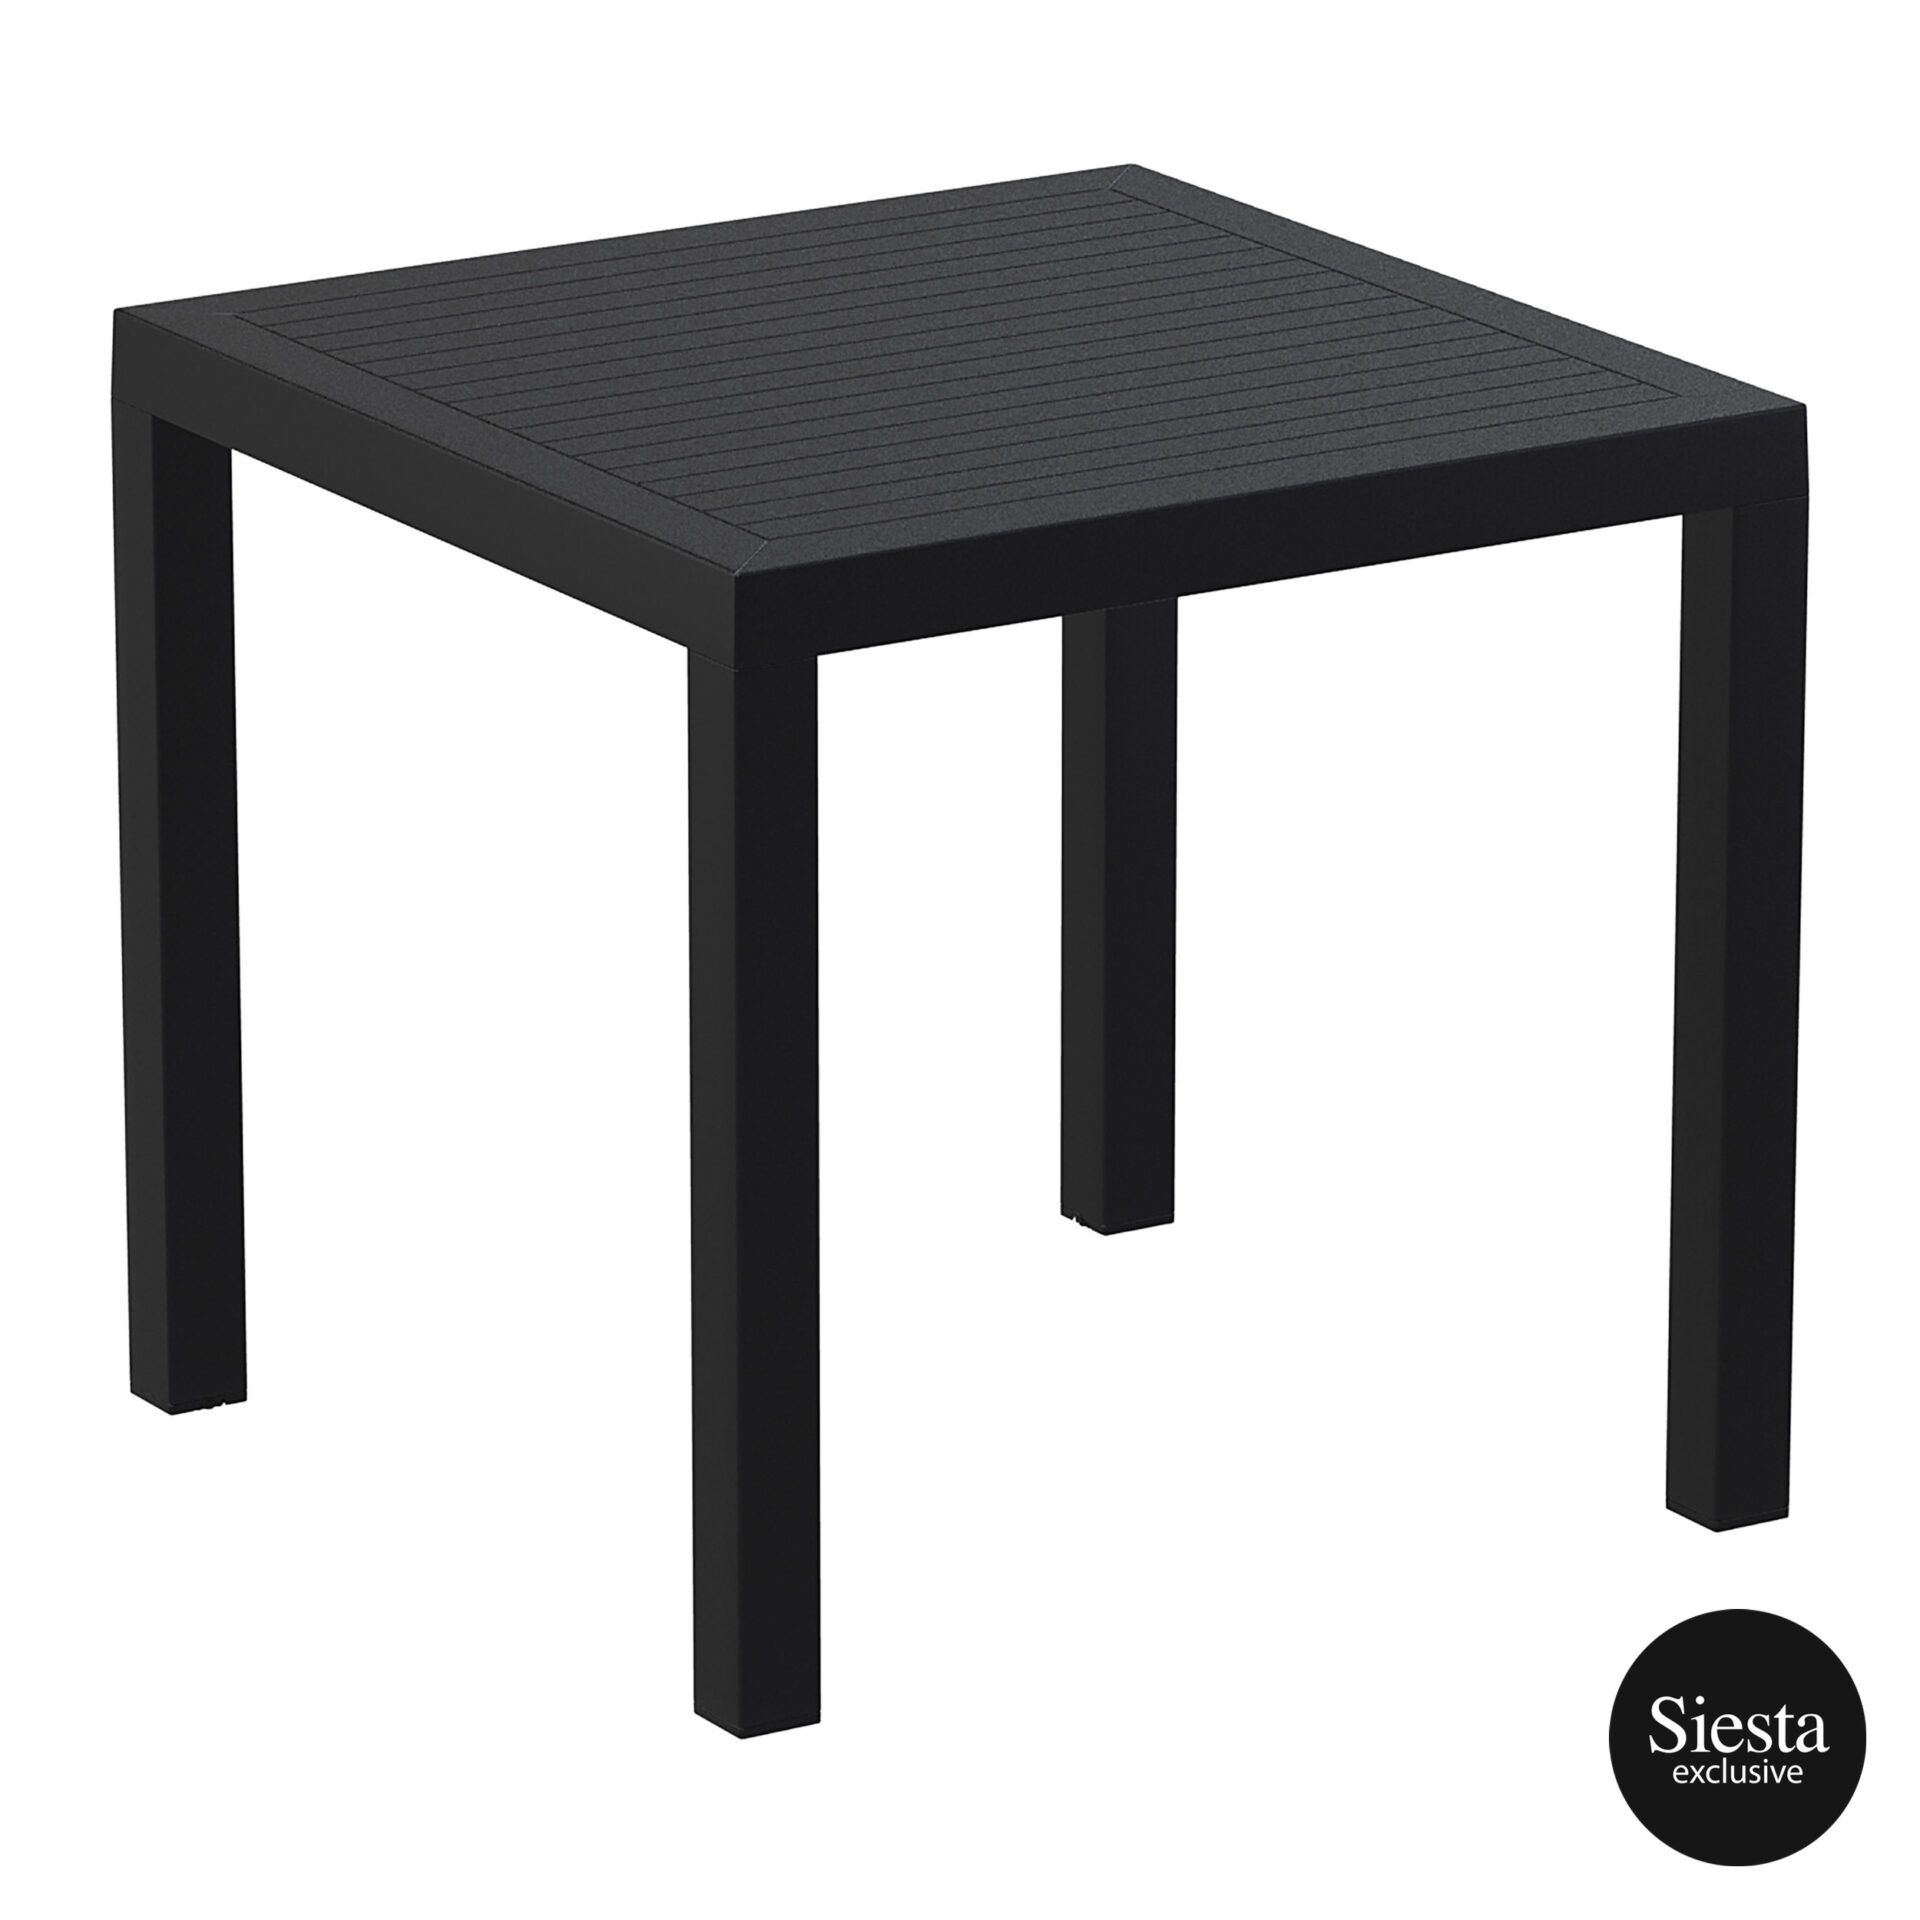 Ares 80 Table - Black